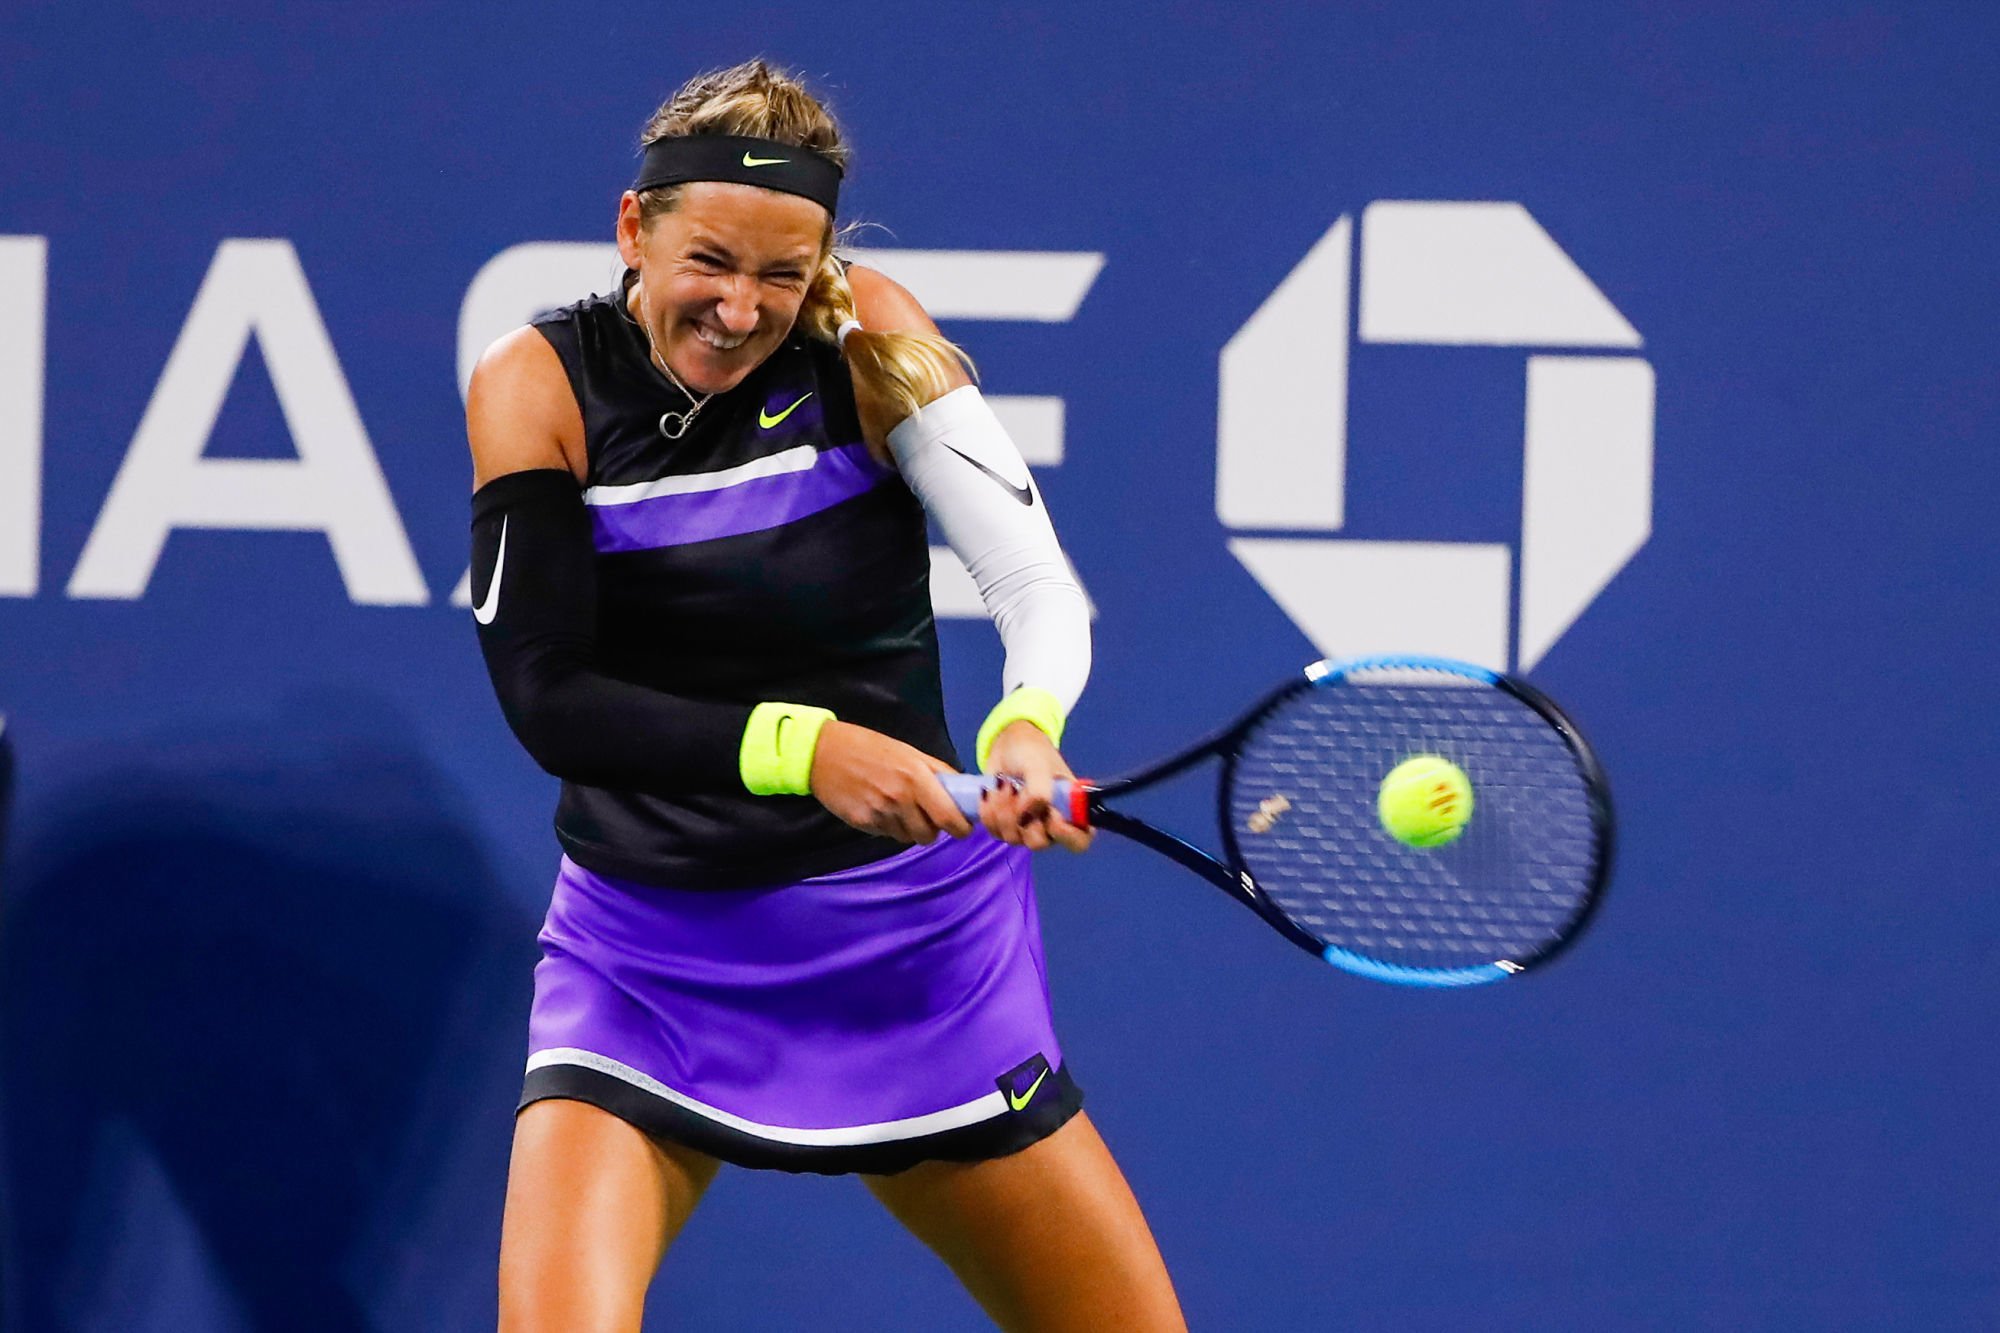 Aug 27, 2019; Flushing, NY, USA; Victoria Azarenka of Belarus hits a backhand against Aryna Sabalenka of Belarus (not pictured) in the first round on day two of the 2019 U.S. Open tennis tournament at USTA Billie Jean King National Tennis Center. Photo : SUSA / Icon Sport